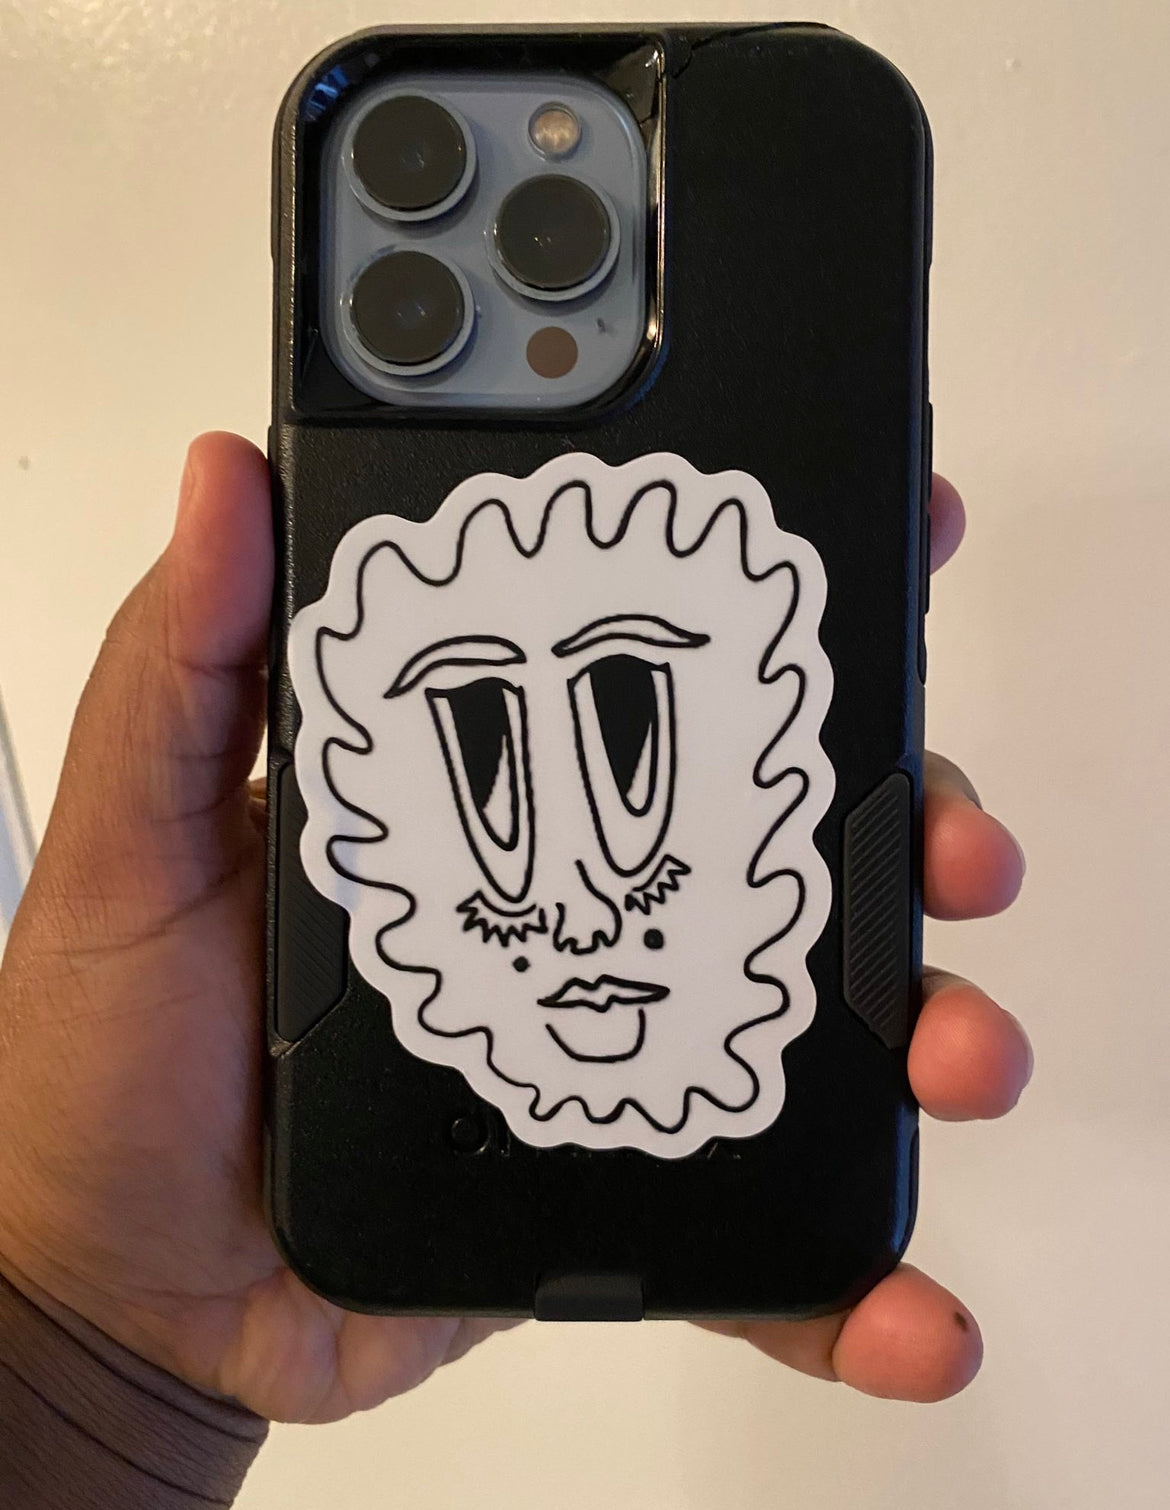 "floating face" sticker being shown on the back of the artist's phone